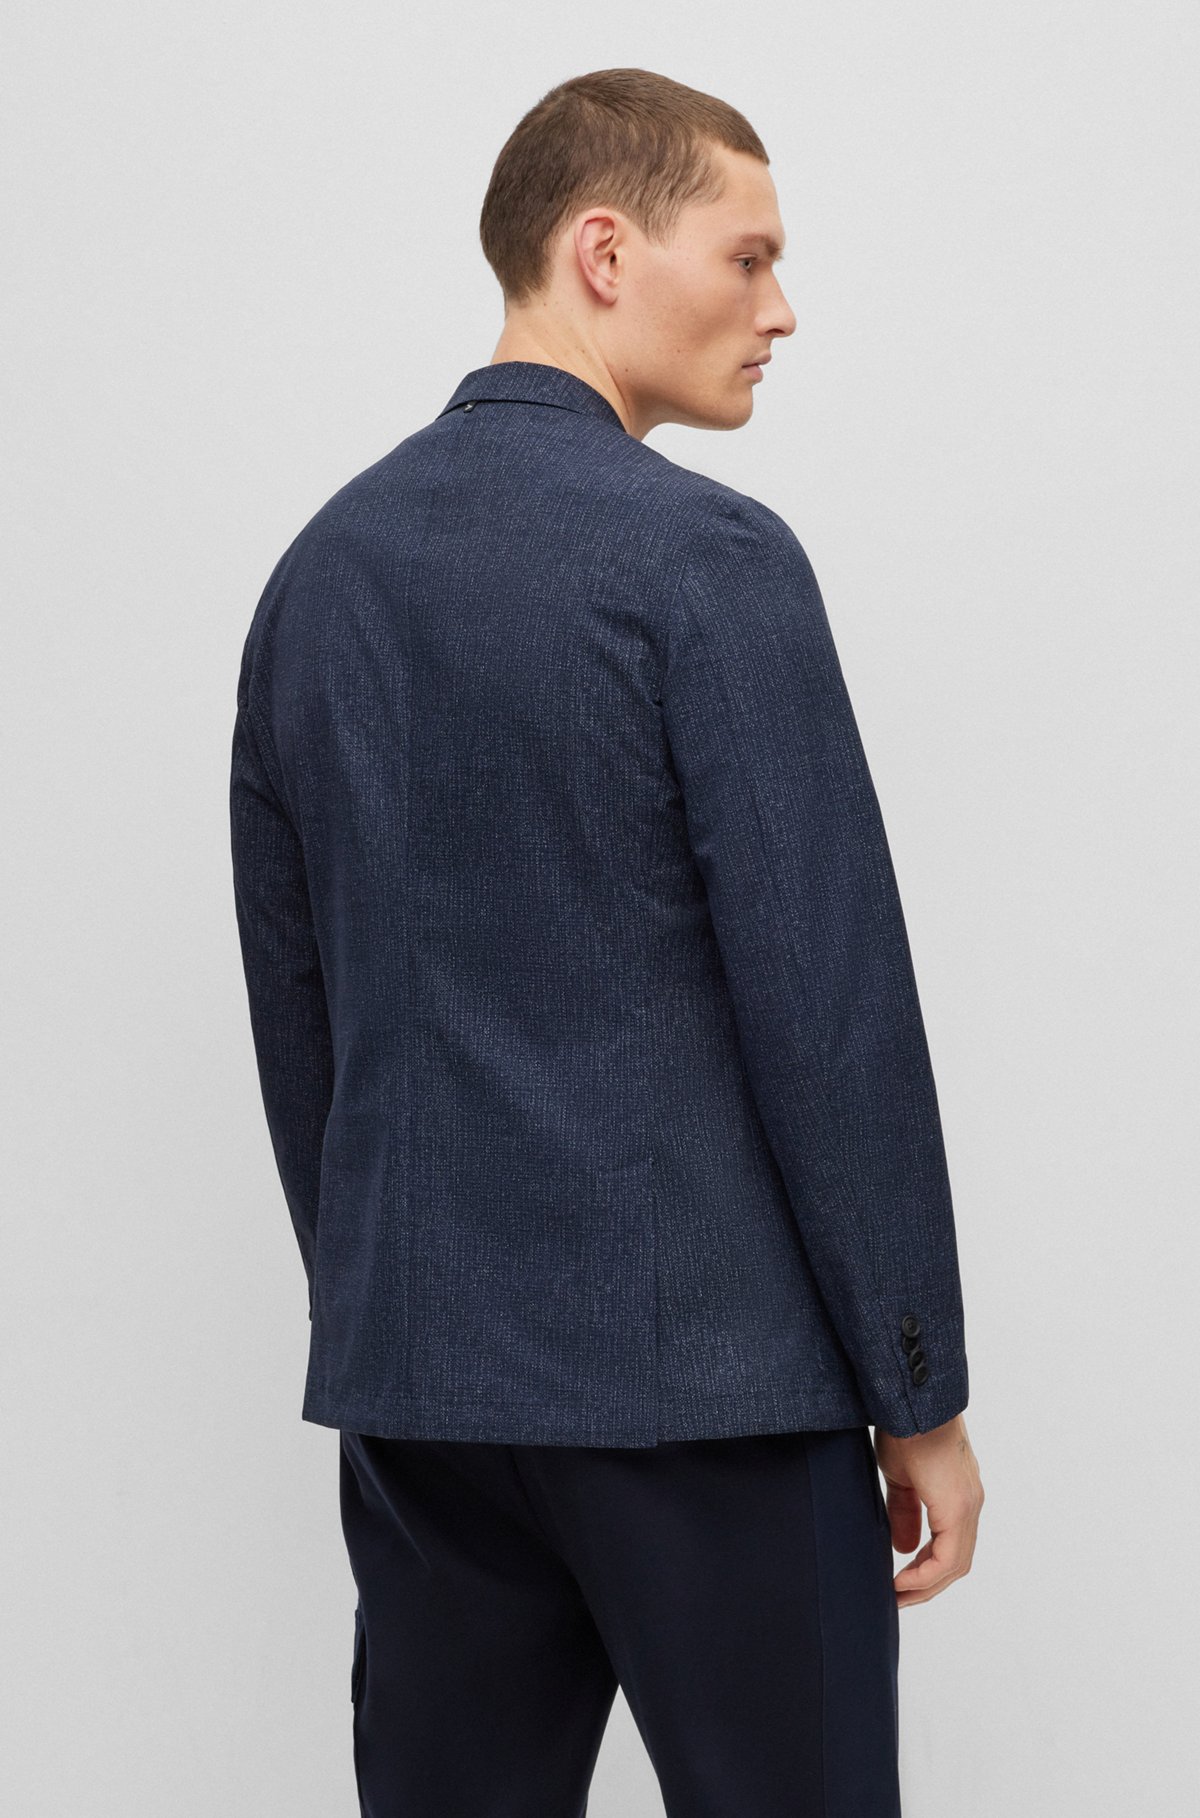 Slim-fit jacket in washable water-repellent fabric, Dark Blue